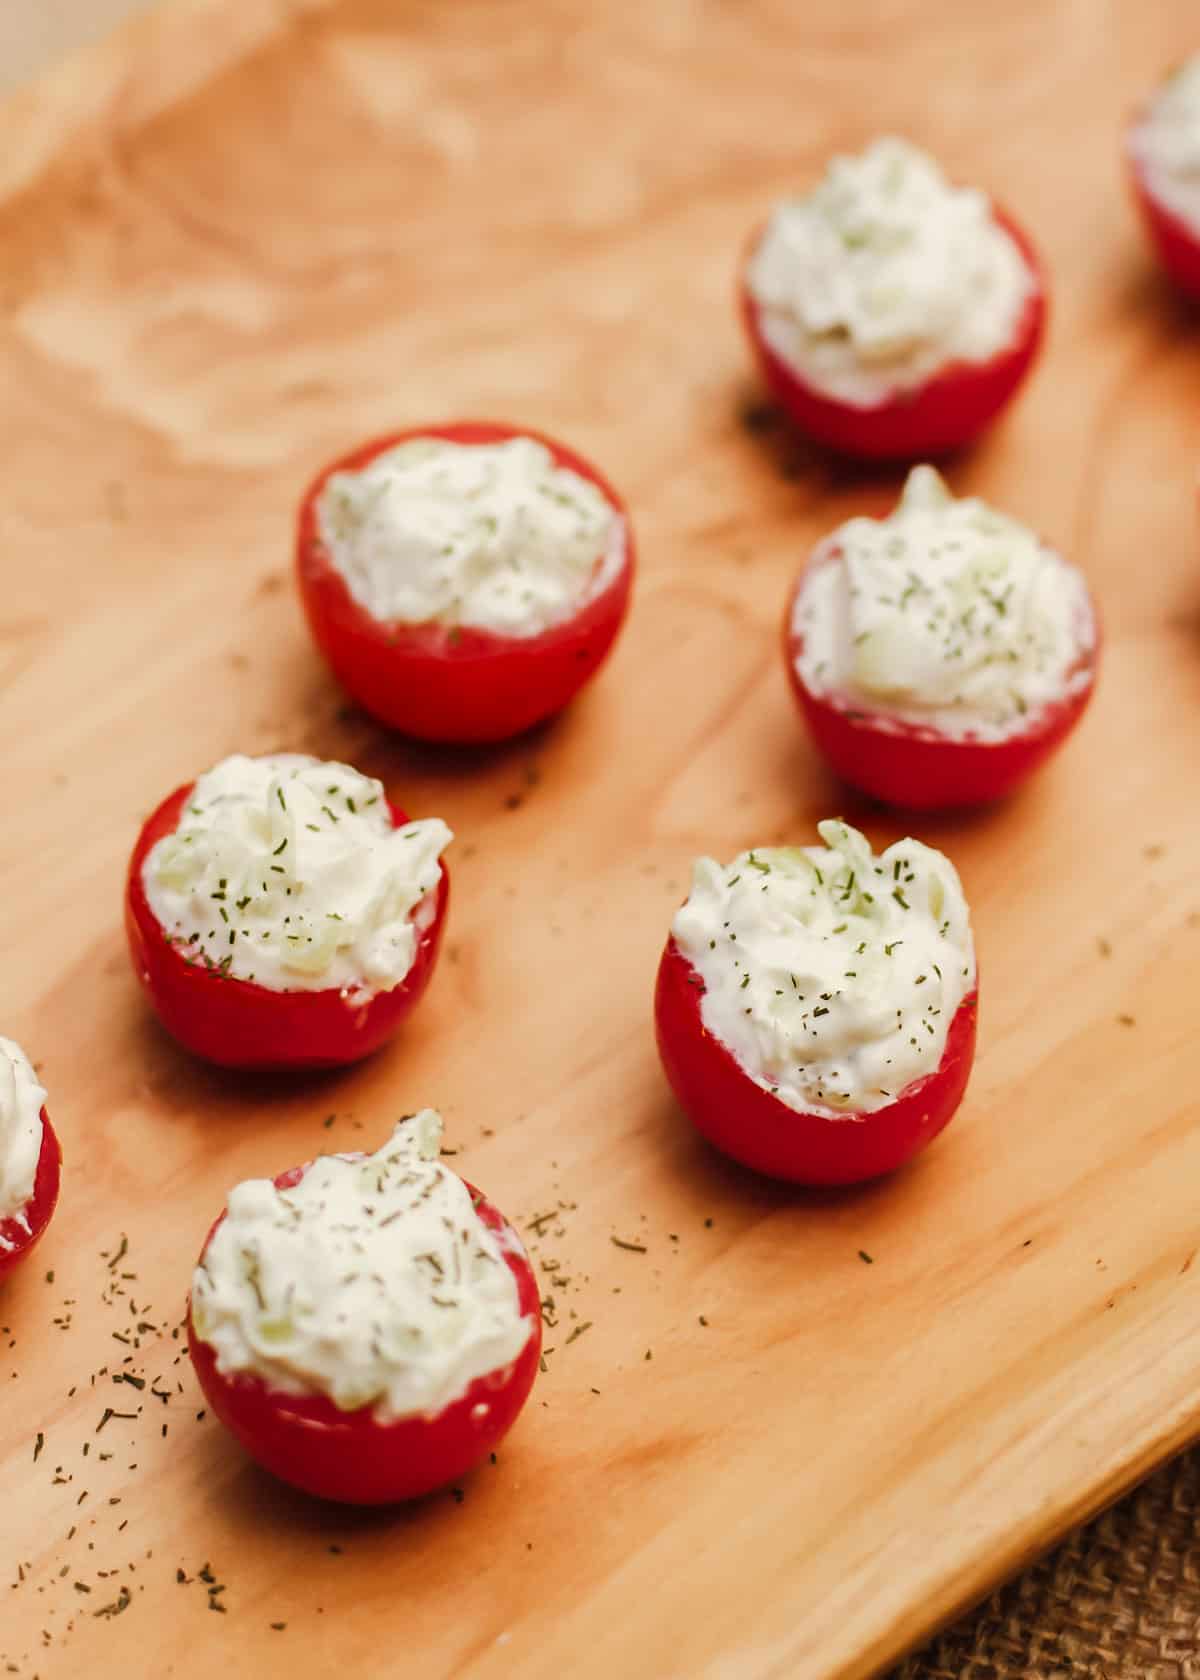 cherry tomatoes stuffed with cream filling, on wood dish.